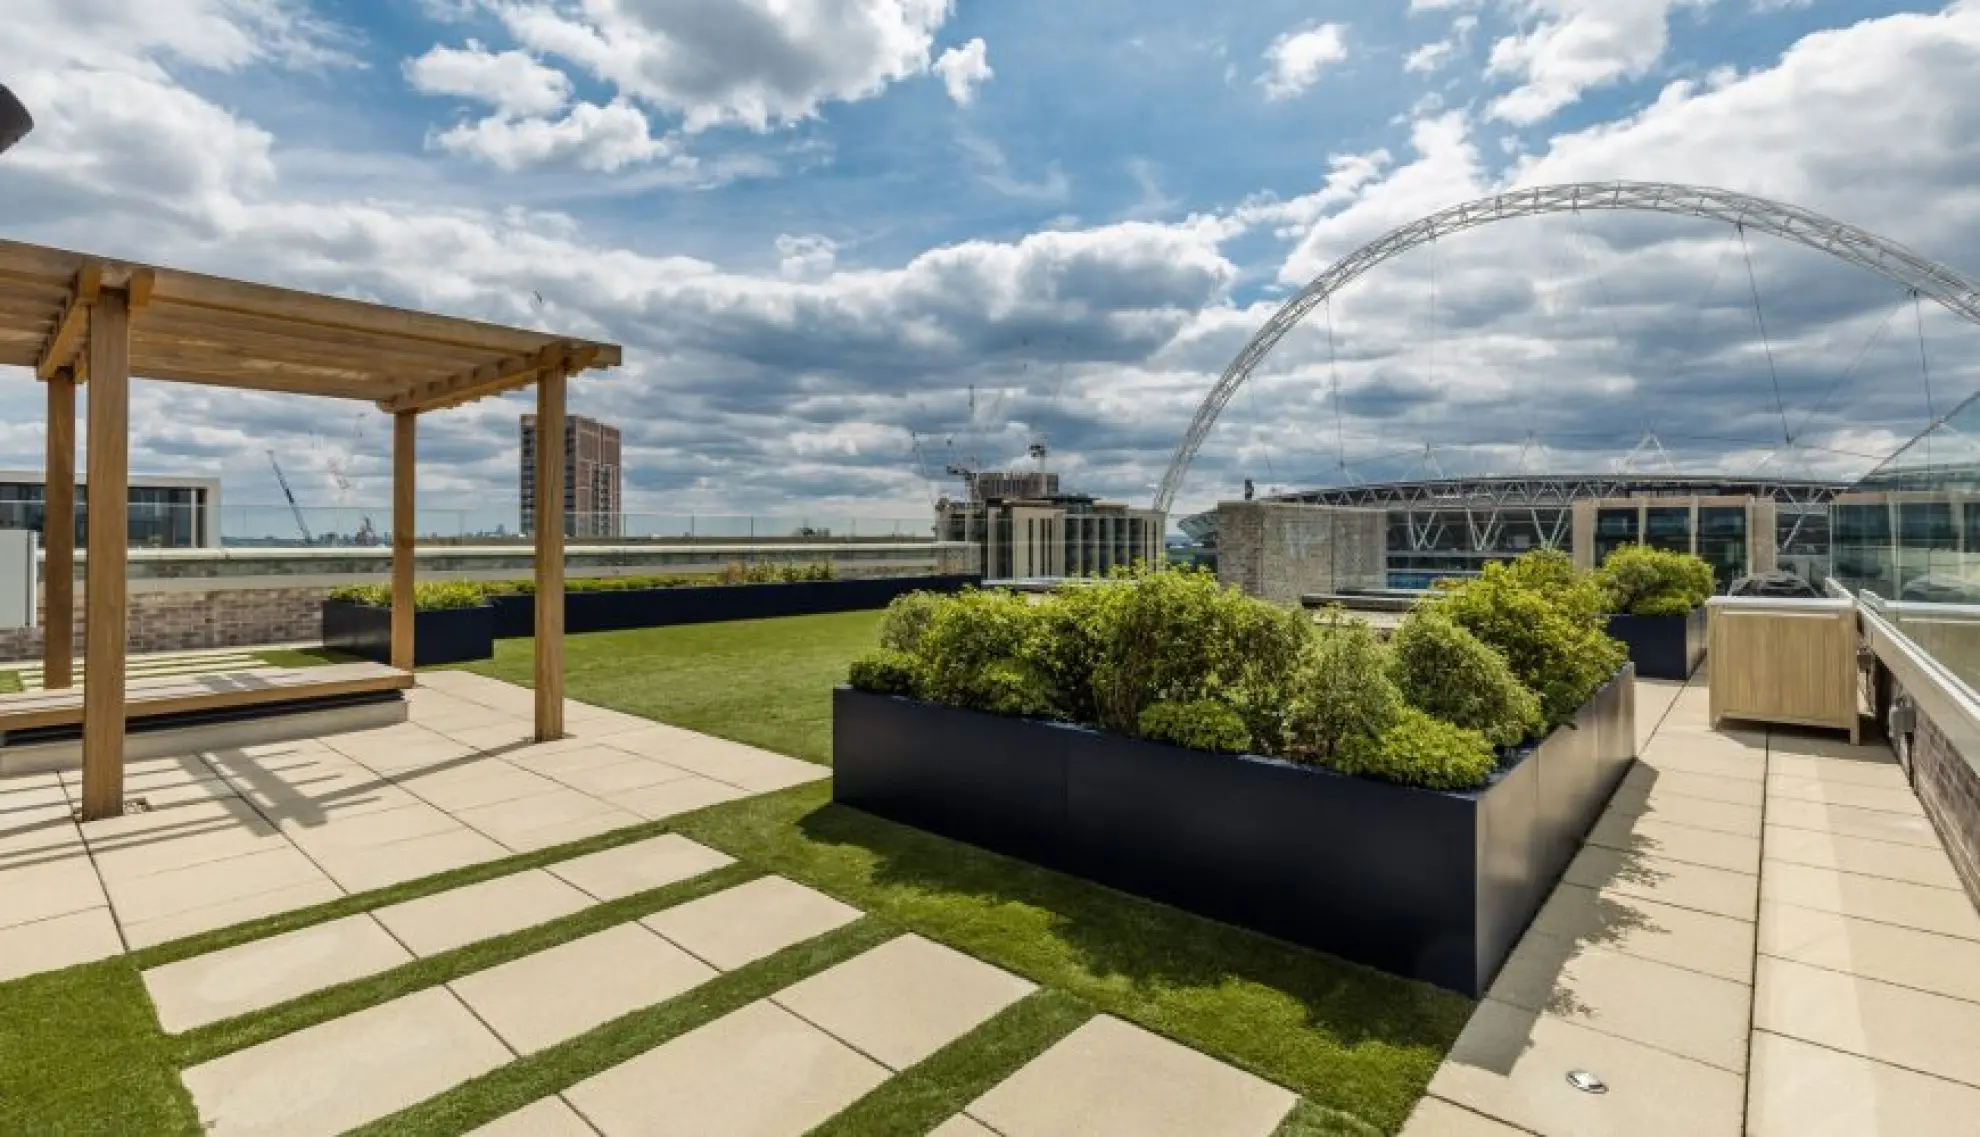 The Landsby rooftop terrace in Wembley Park, North West London